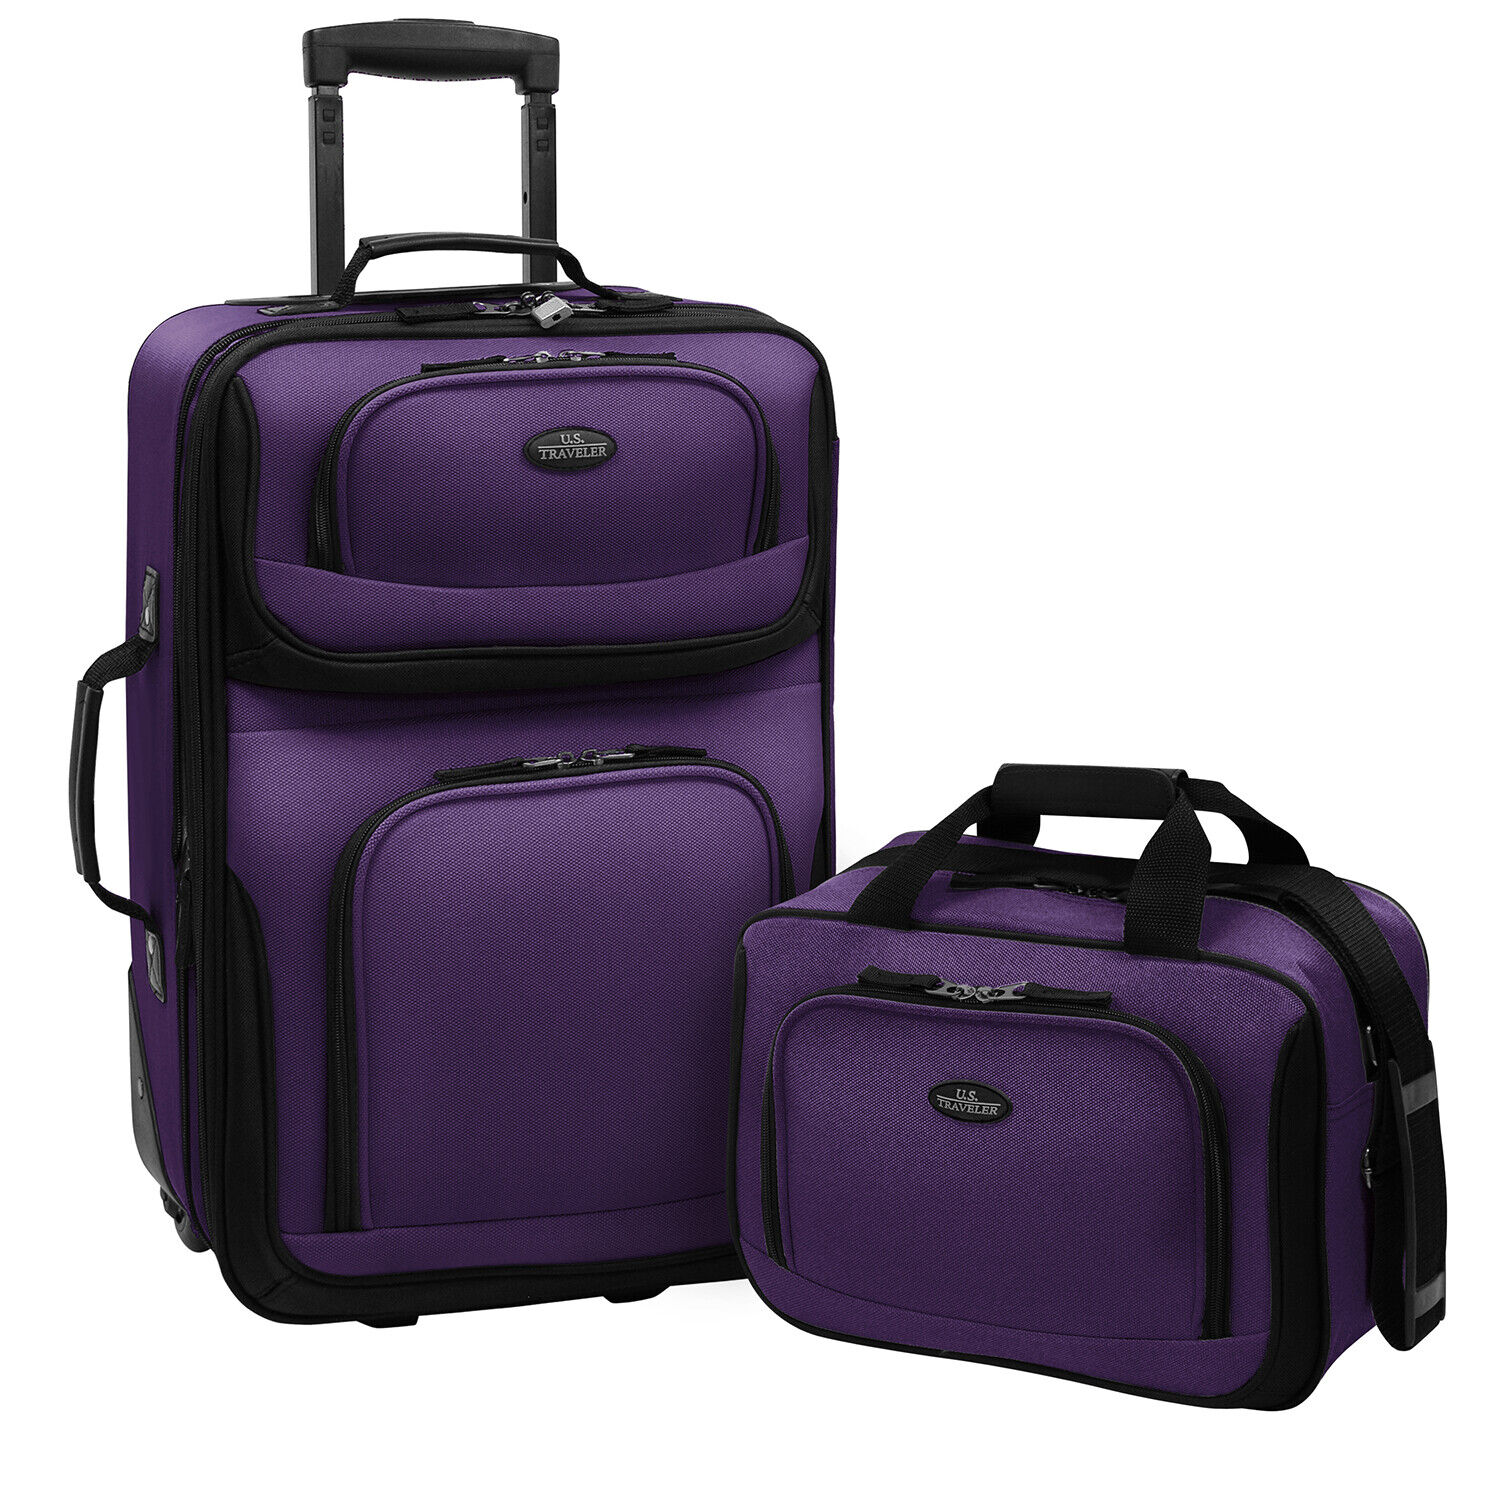 Carry-on Rio Purple Rolling Lightweight Expandable Suitcase Tote Bag Luggage Set